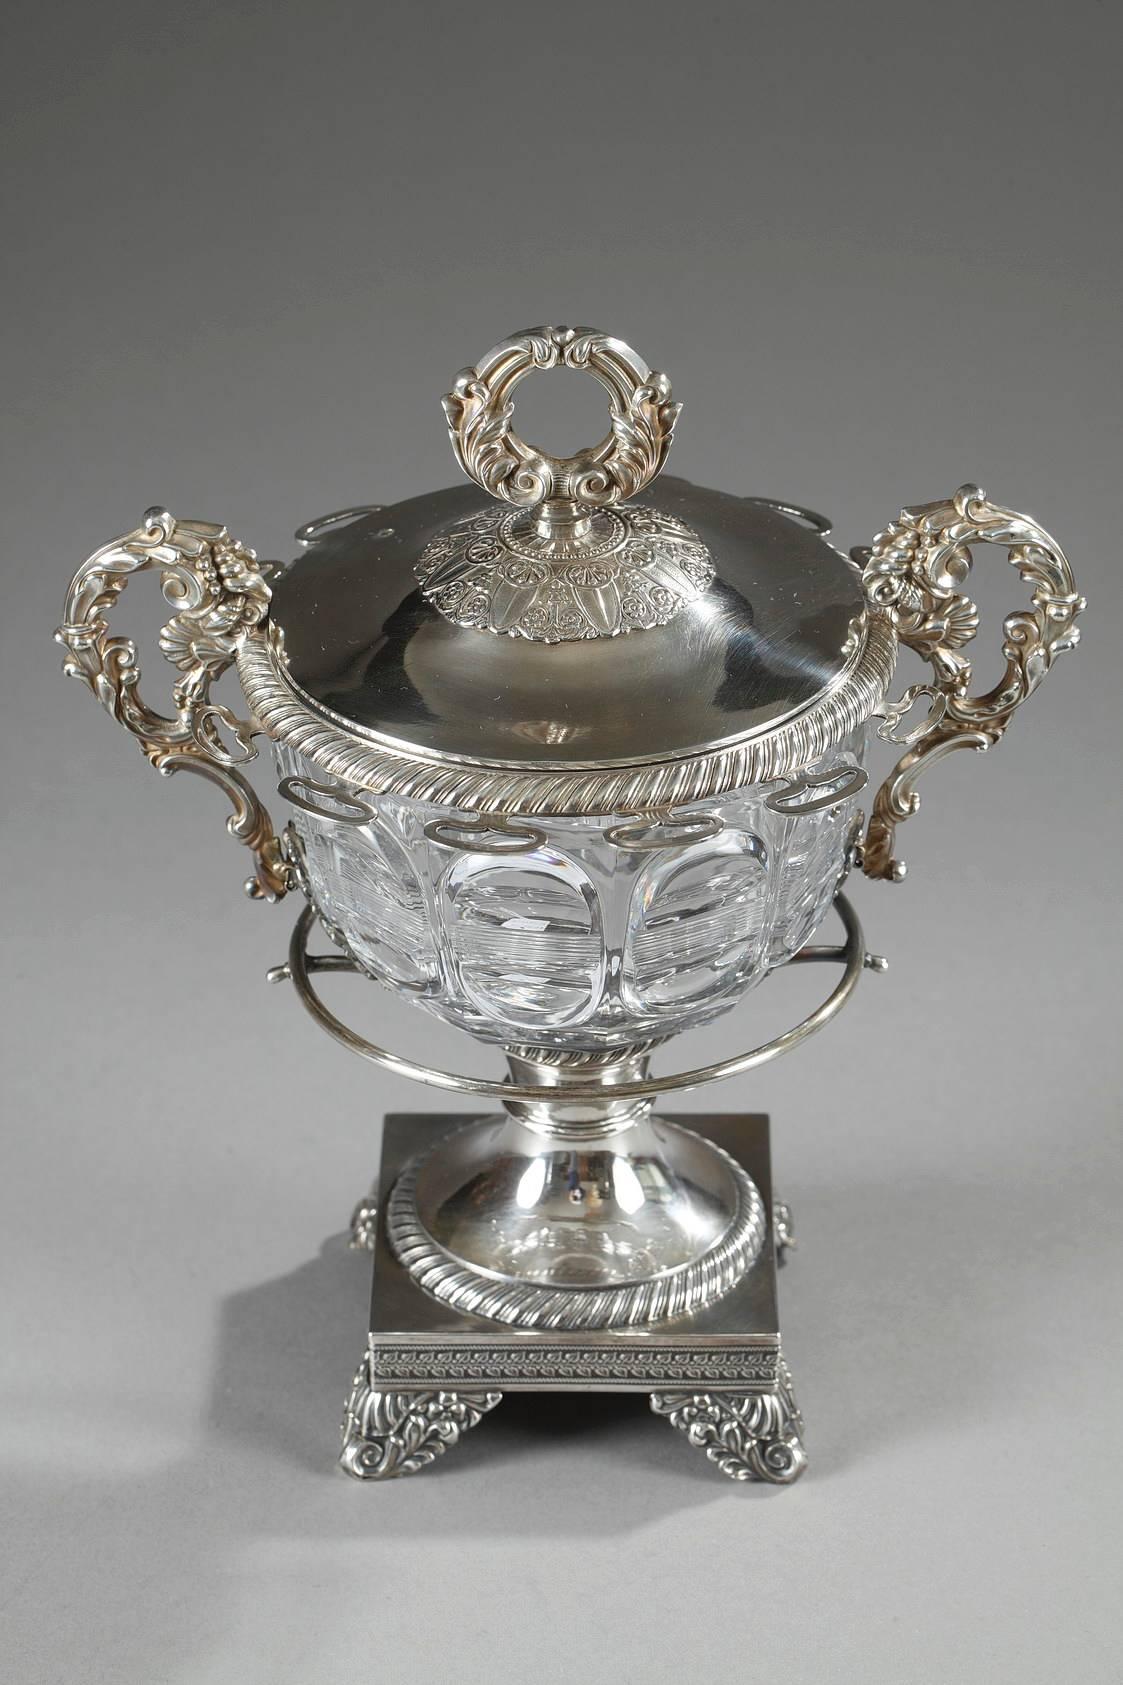 Silver and cut-crystal candy dish decorated with geometrical patterns. The two silver handles are richly adorned with acanthus leaves, scrolling foliage, shells, and palmettes. The removable lid is ringed with a spiralling frieze, and it is topped